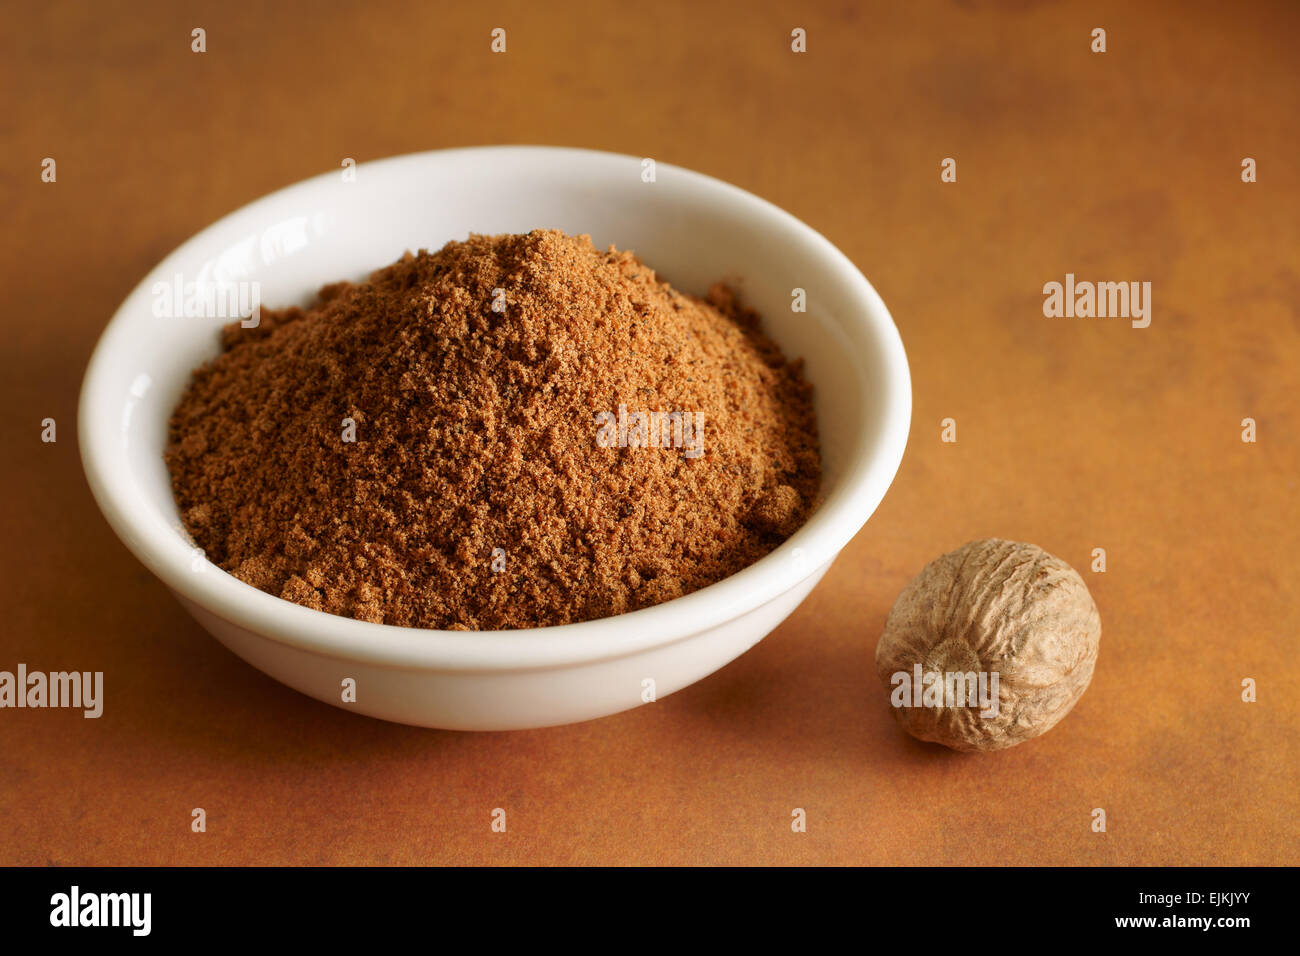 Whole and ground nutmeg a fragrant spice from the fruit Myristica fragrans indigenous to the Banda Islands of Indonesia Stock Photo